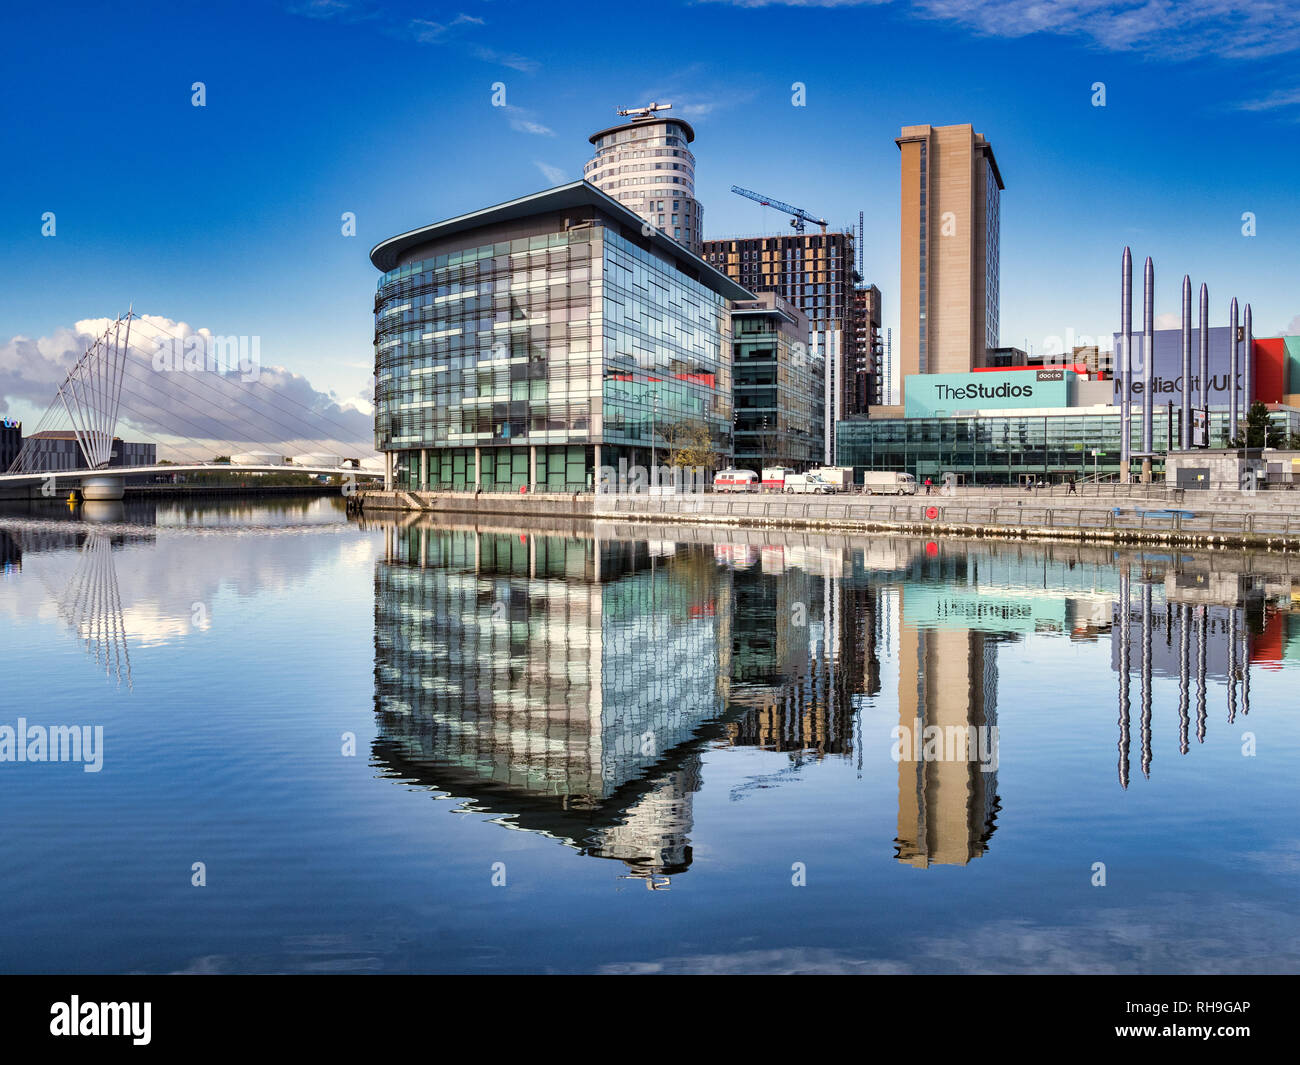 2 November 2018: Manchester, UK - Media City UK reflected in the Manchester Ship Canal, on a perfect autumn day. Stock Photo